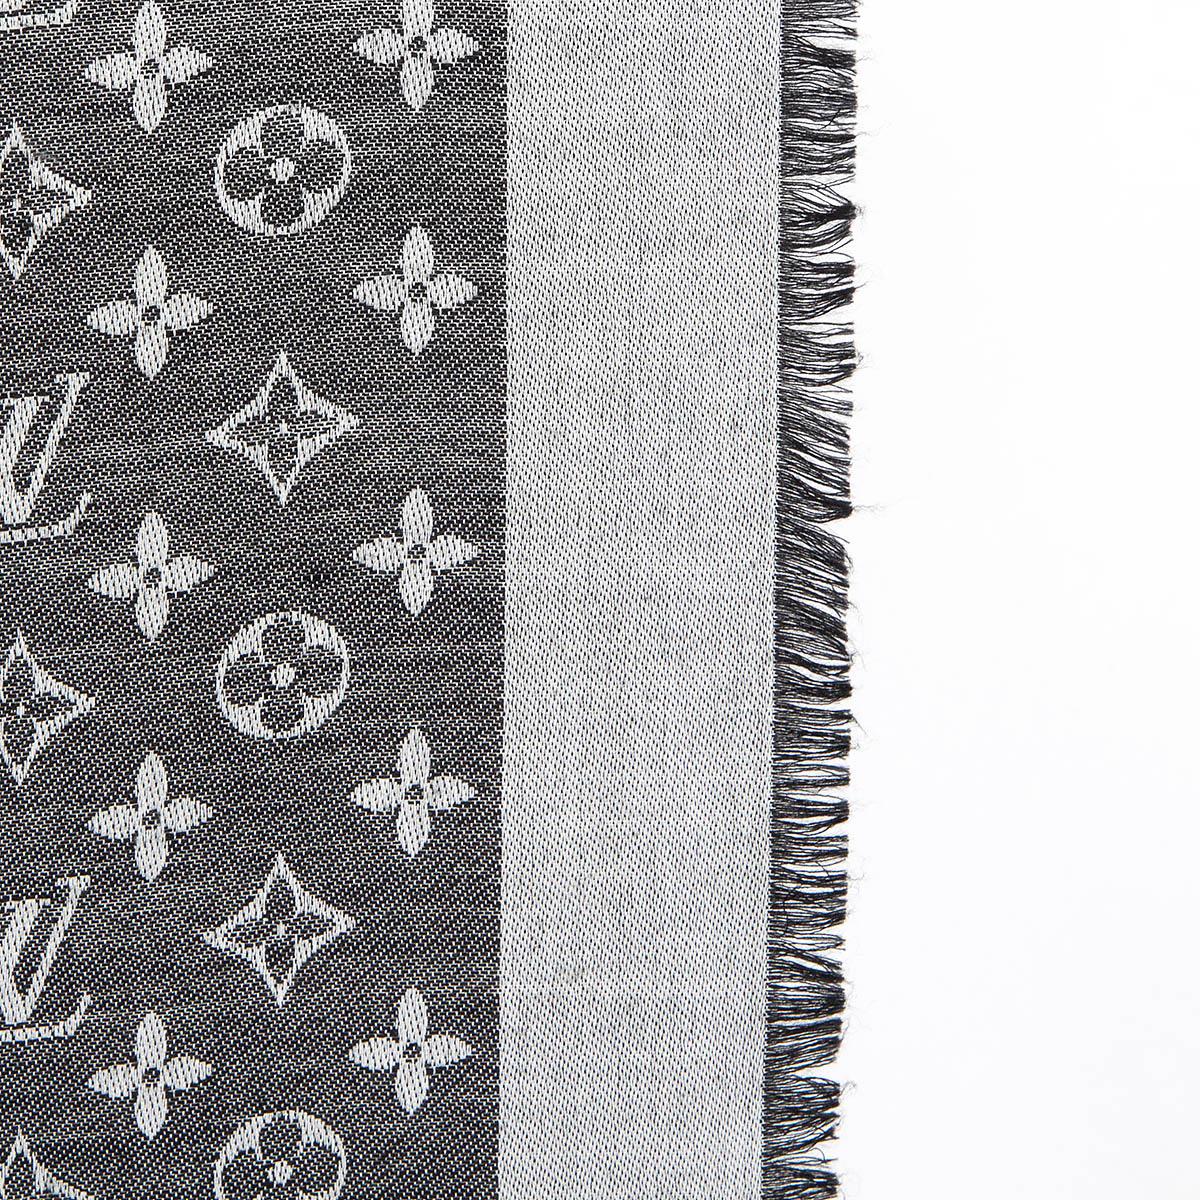 100% authentic Louis Vuitton classic Monogram shawl in light grey and black silk (60%) and wool (40%) featuring fringed edges. Has been worn and shows a few pulled threads. Overall in very good condition. 

Measurements
Width	140cm